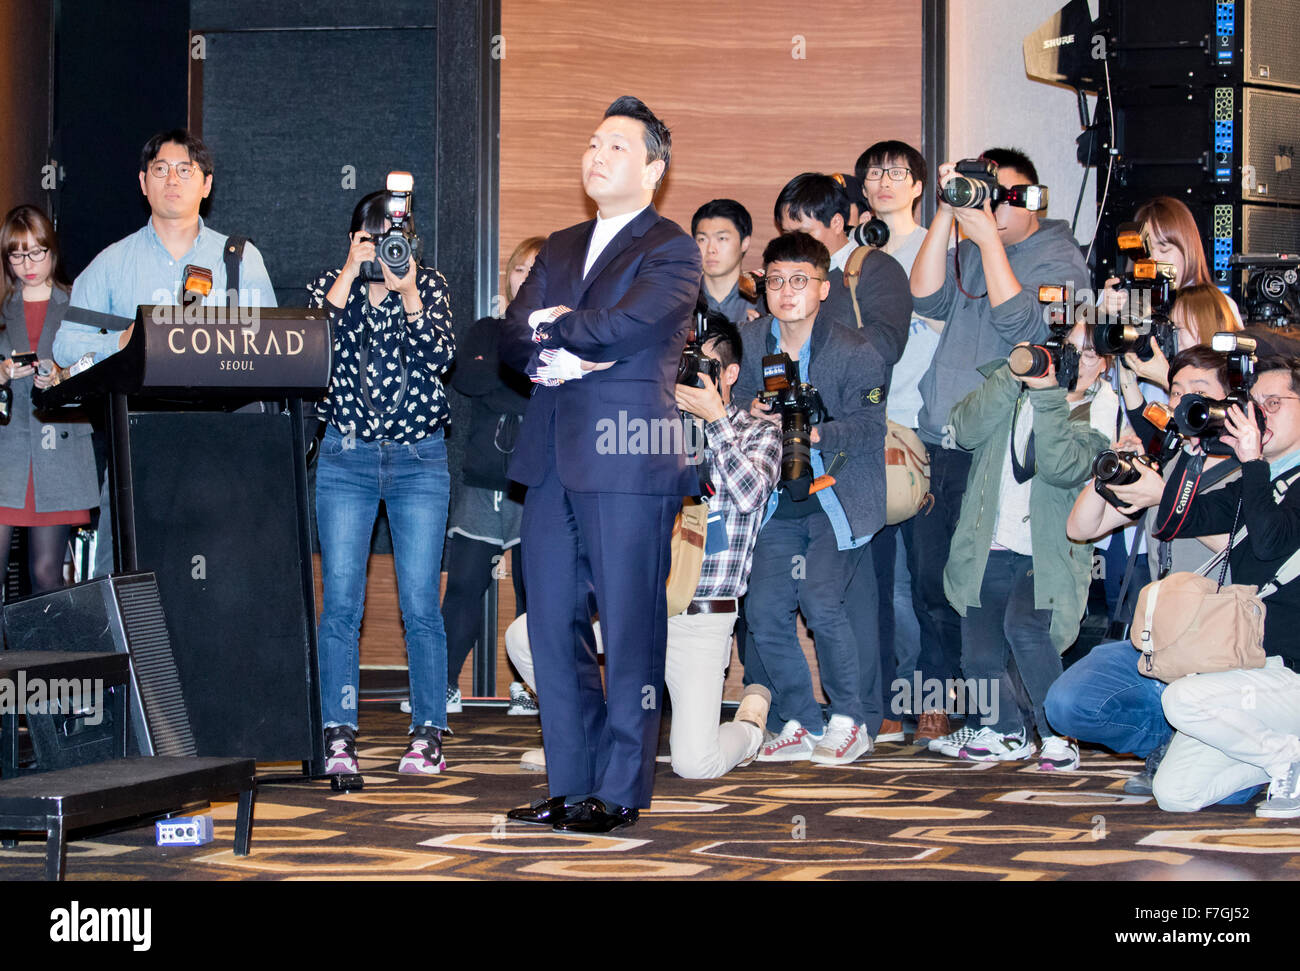 Psy, Nov 30, 2015 : South Korean singer Psy (C) looks his new music videos played on a screen during a press conference about his new 7th album in Seoul, South Korea. Psy's 7th album has nine tracks with two leading tunes, "Napal Baji (Bellbottoms)" and "Daddy". International artists such as will.i.am, Ed Sheeran and Zion T are featured as guest performers in the album. © Lee Jae-Won/AFLO/Alamy Live News Stock Photo